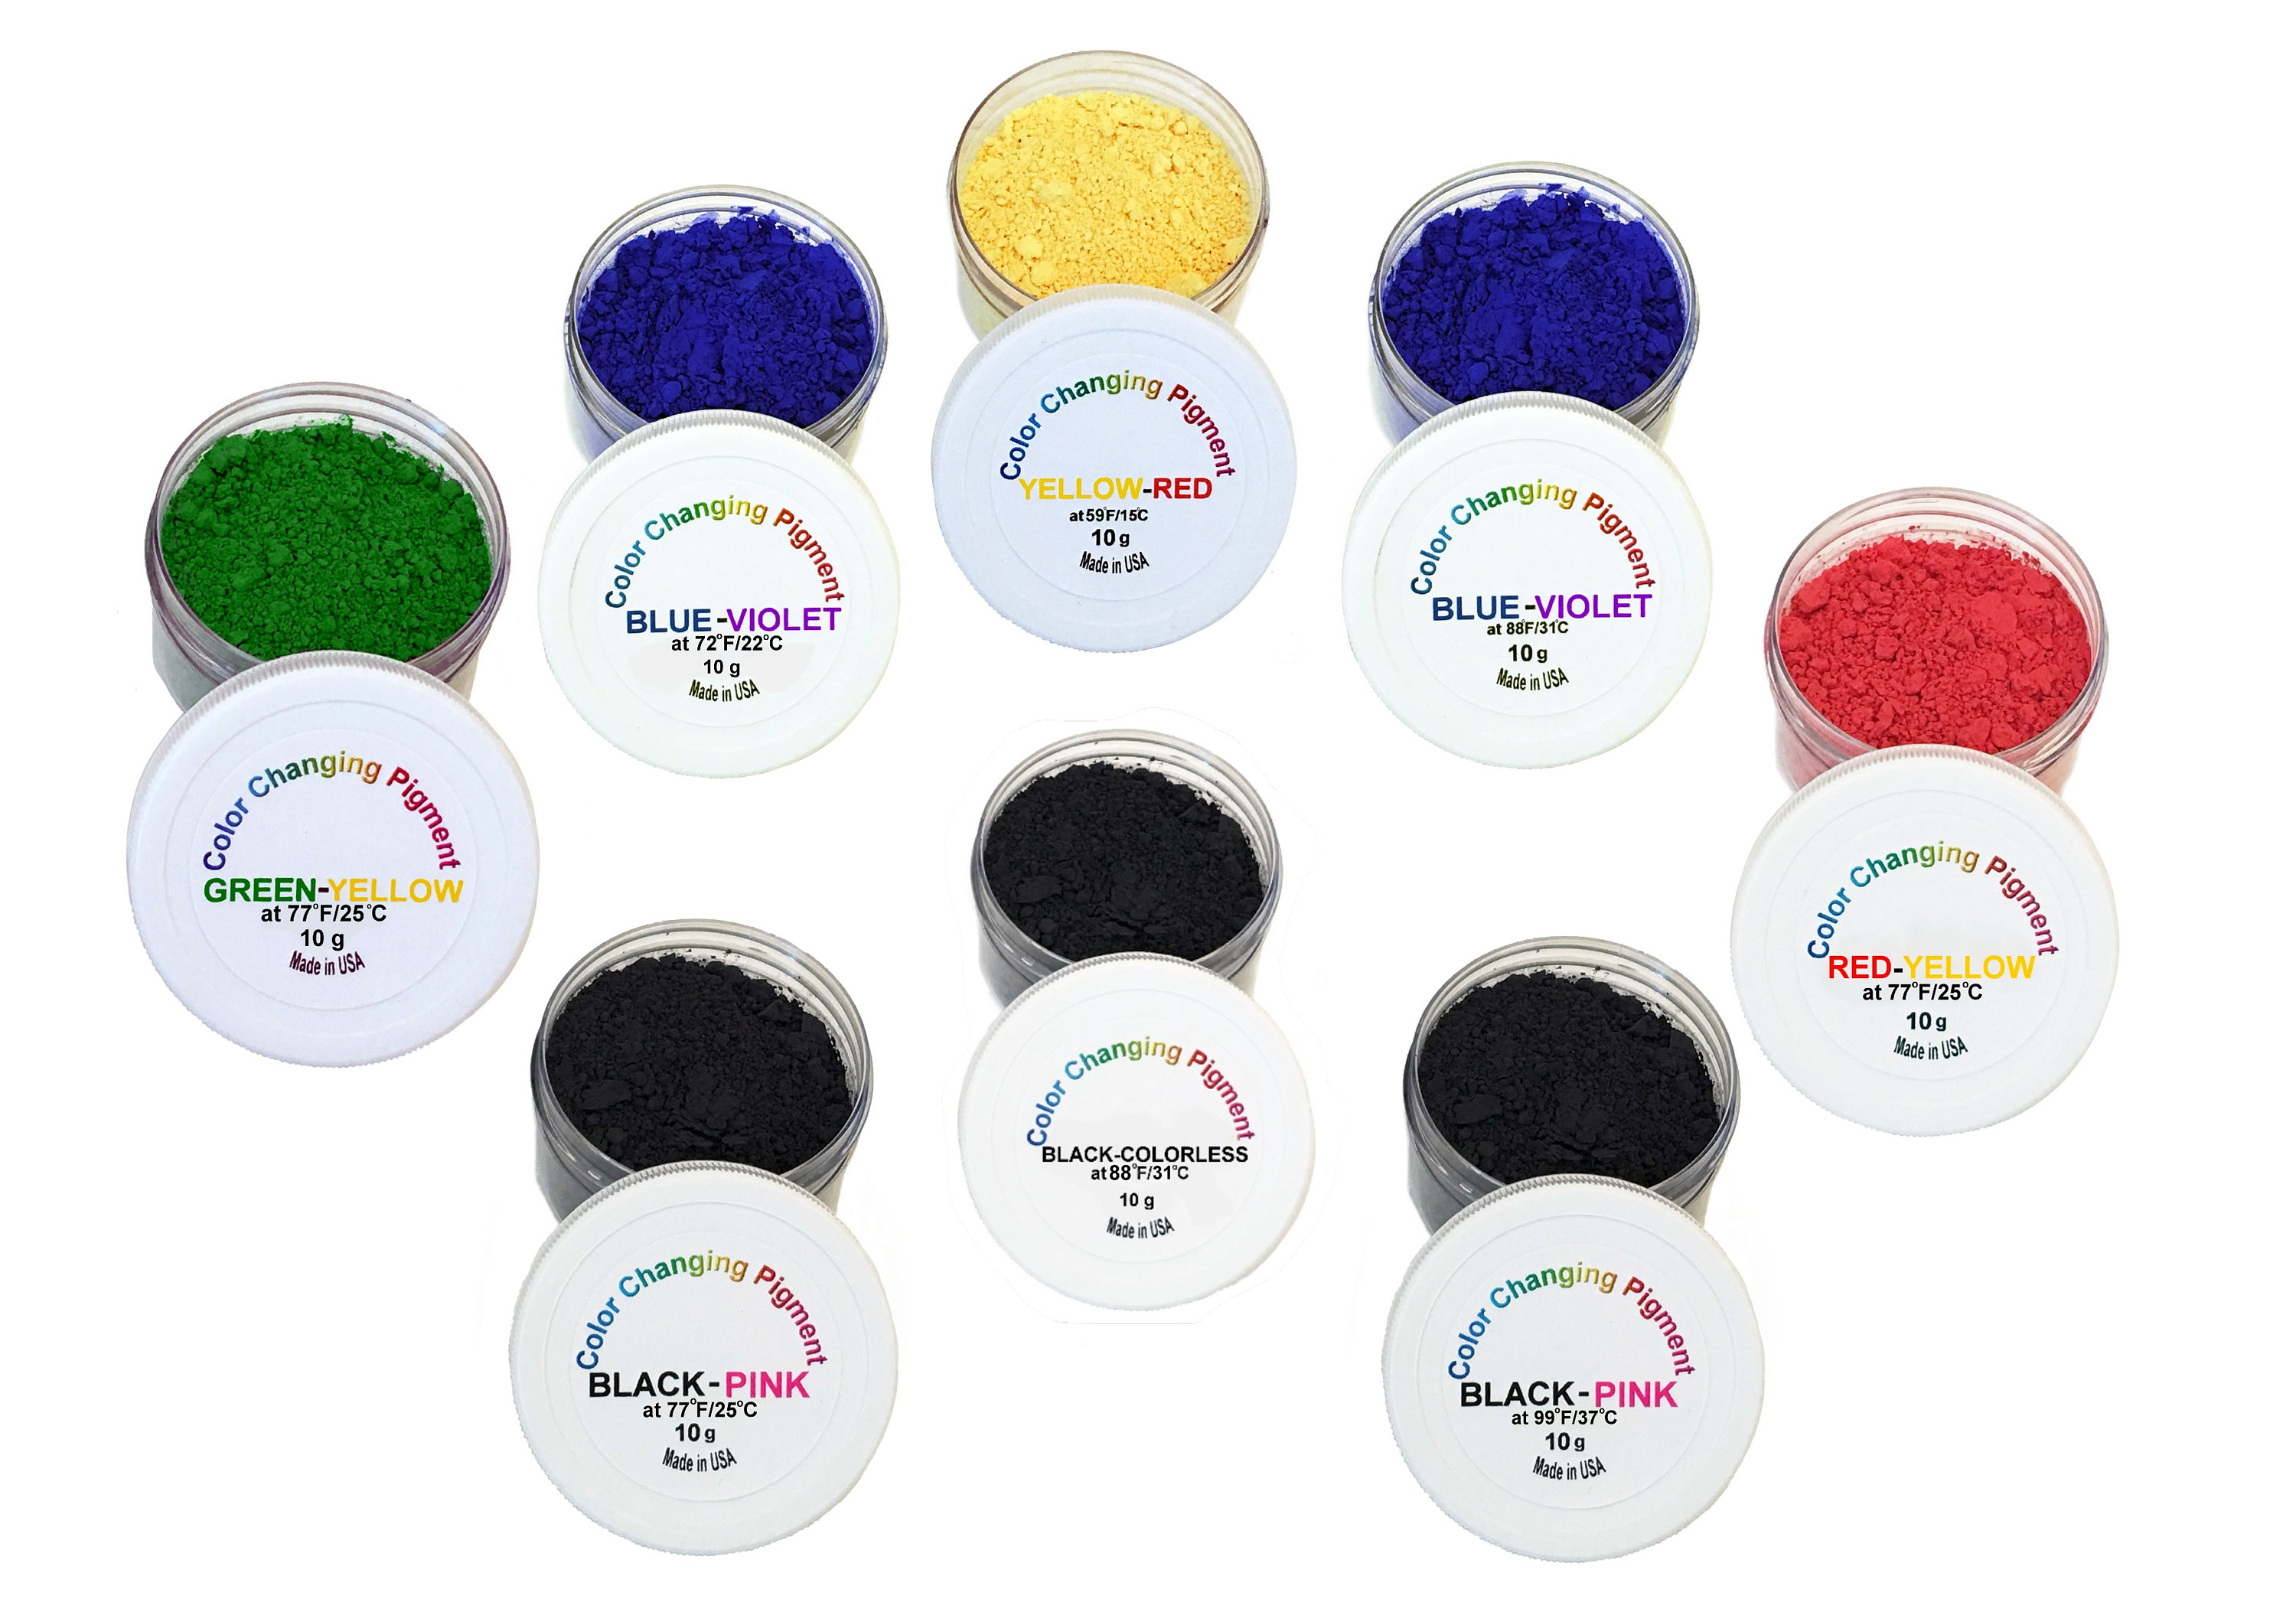 PRESTIGE THERMOCHROMIC PIGMENT Powder That Changes Color at 71.6F 22C,  Perfect for Heat-sensitive Color Changing Slime During the Winter 